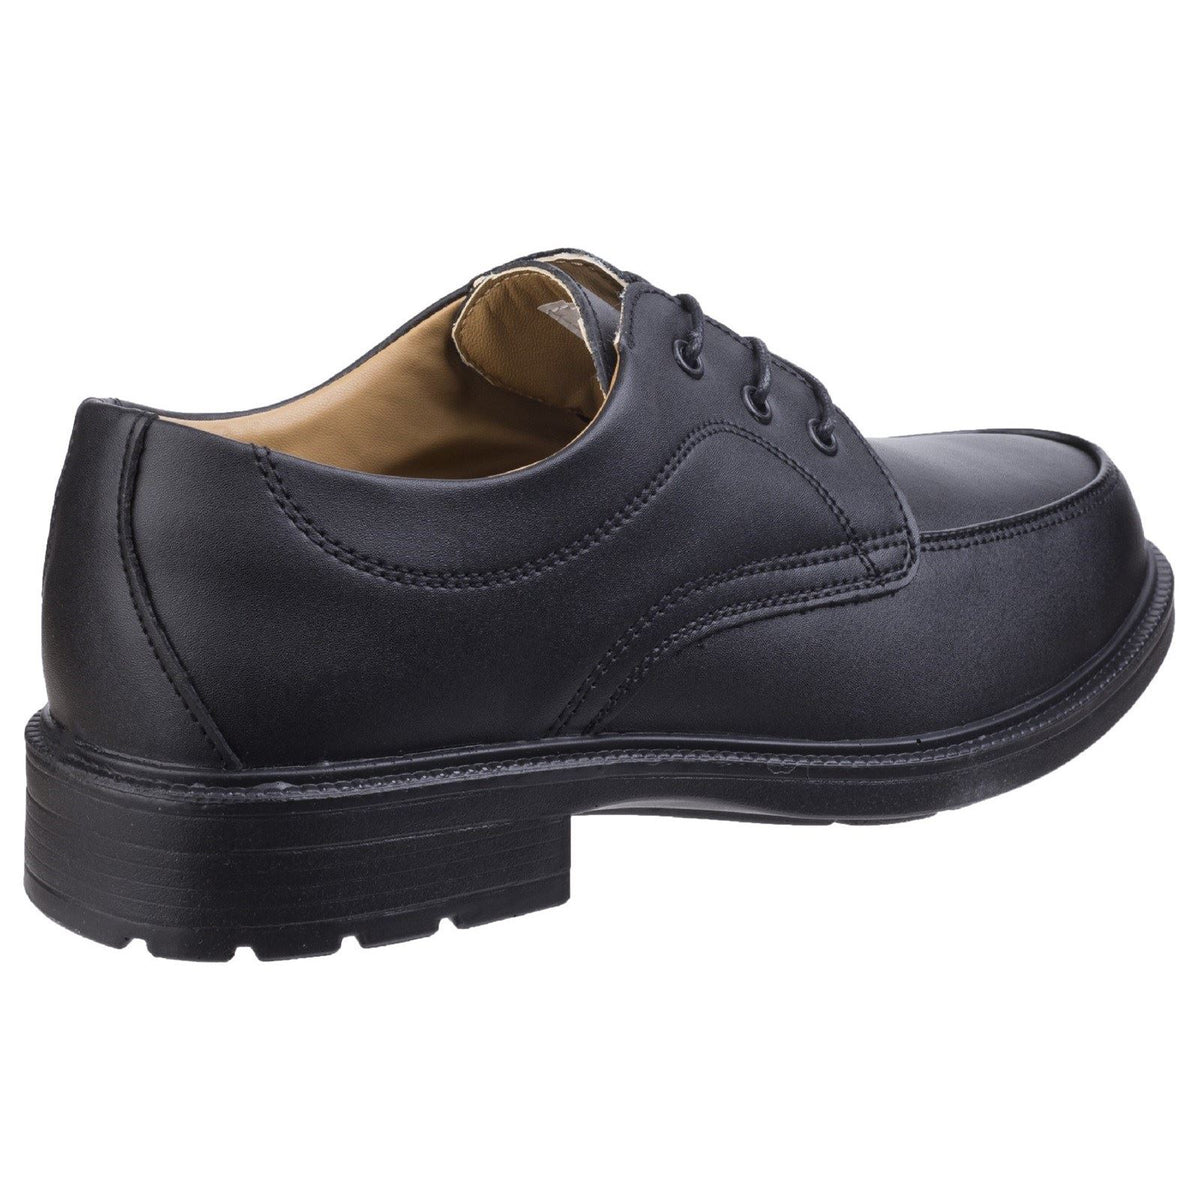 Amblers Safety FS65 Gibson Lace Safety Shoes